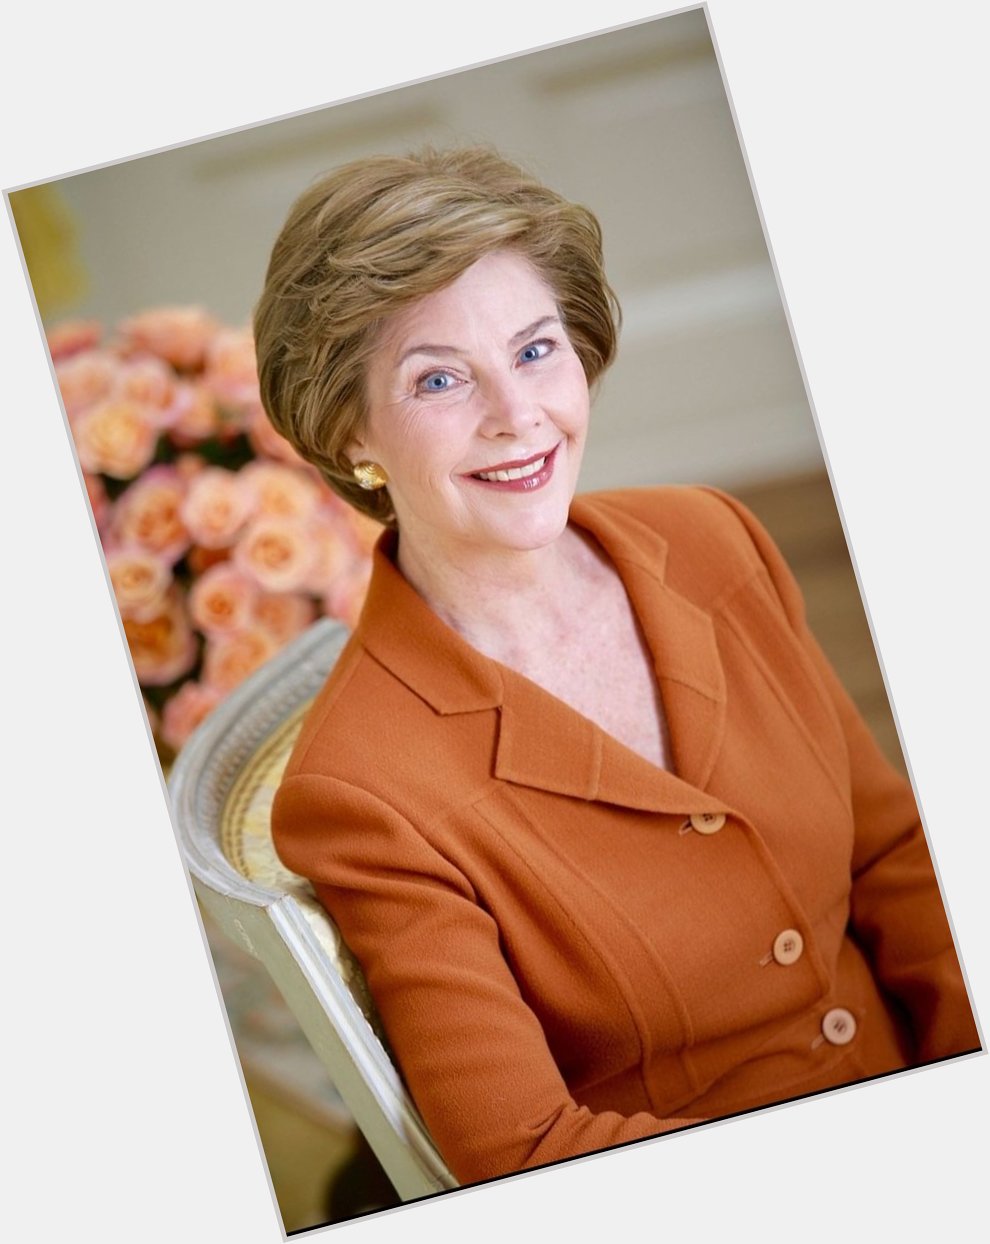 Dear Laura Bush
Former first lady of the United States, Happy Birthday.
God bless you!
God bless Bush family! 